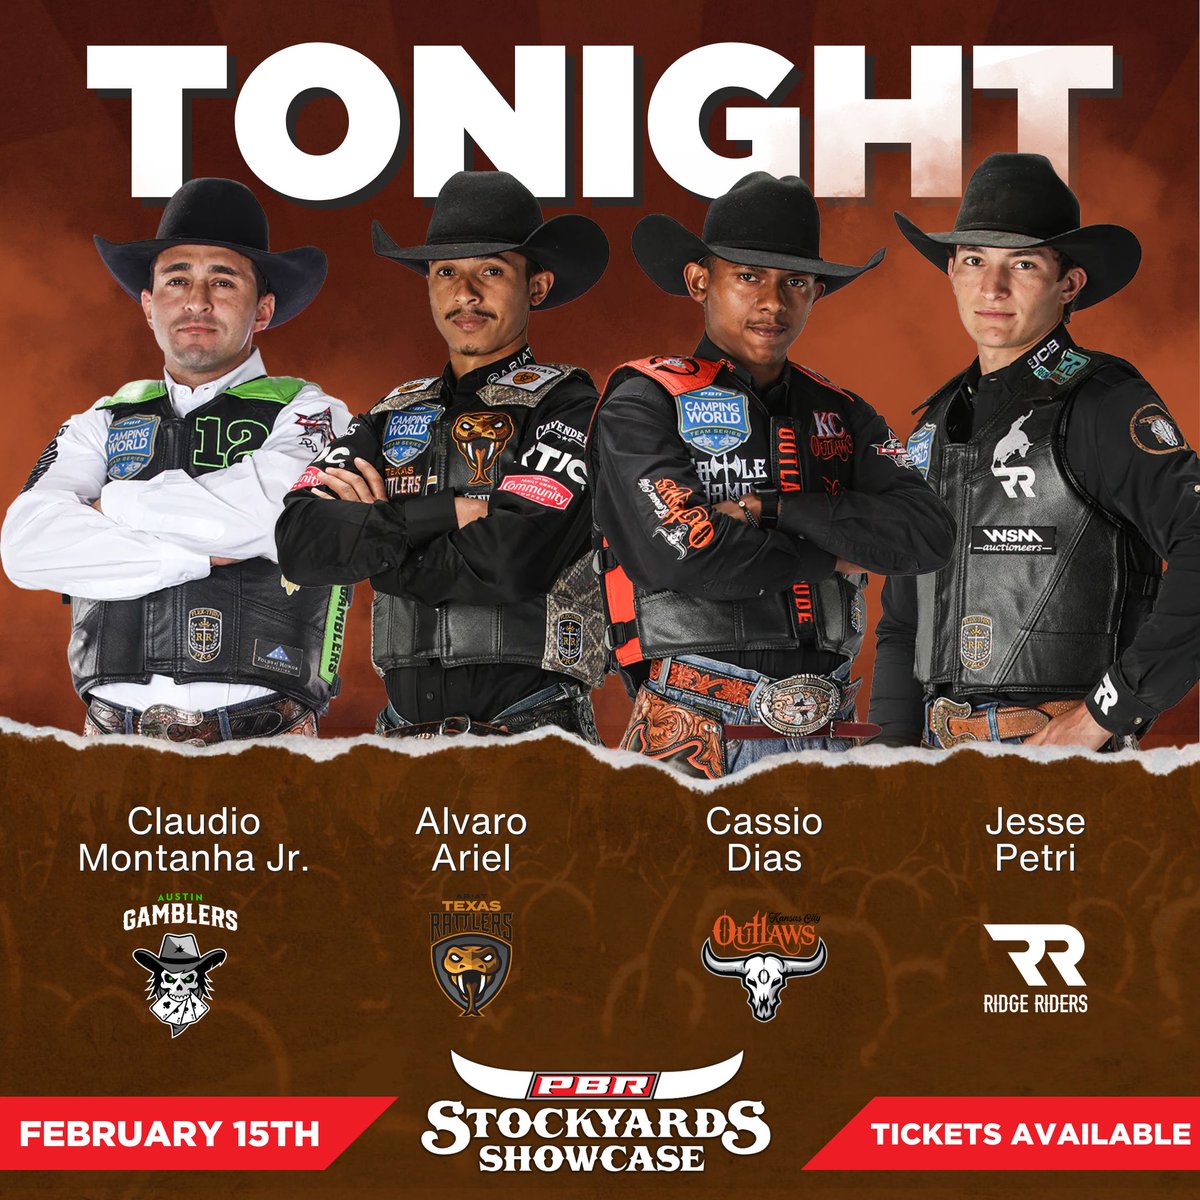 Do you see your favorite bull rider? Come watch these athletes of the PBR and MORE ride TONIGHT at 7:30! This is an event you won't want to miss as they compete for points to qualify for the PBR Ride For Redemption. Secure your seats now at cowtowncoliseum.com